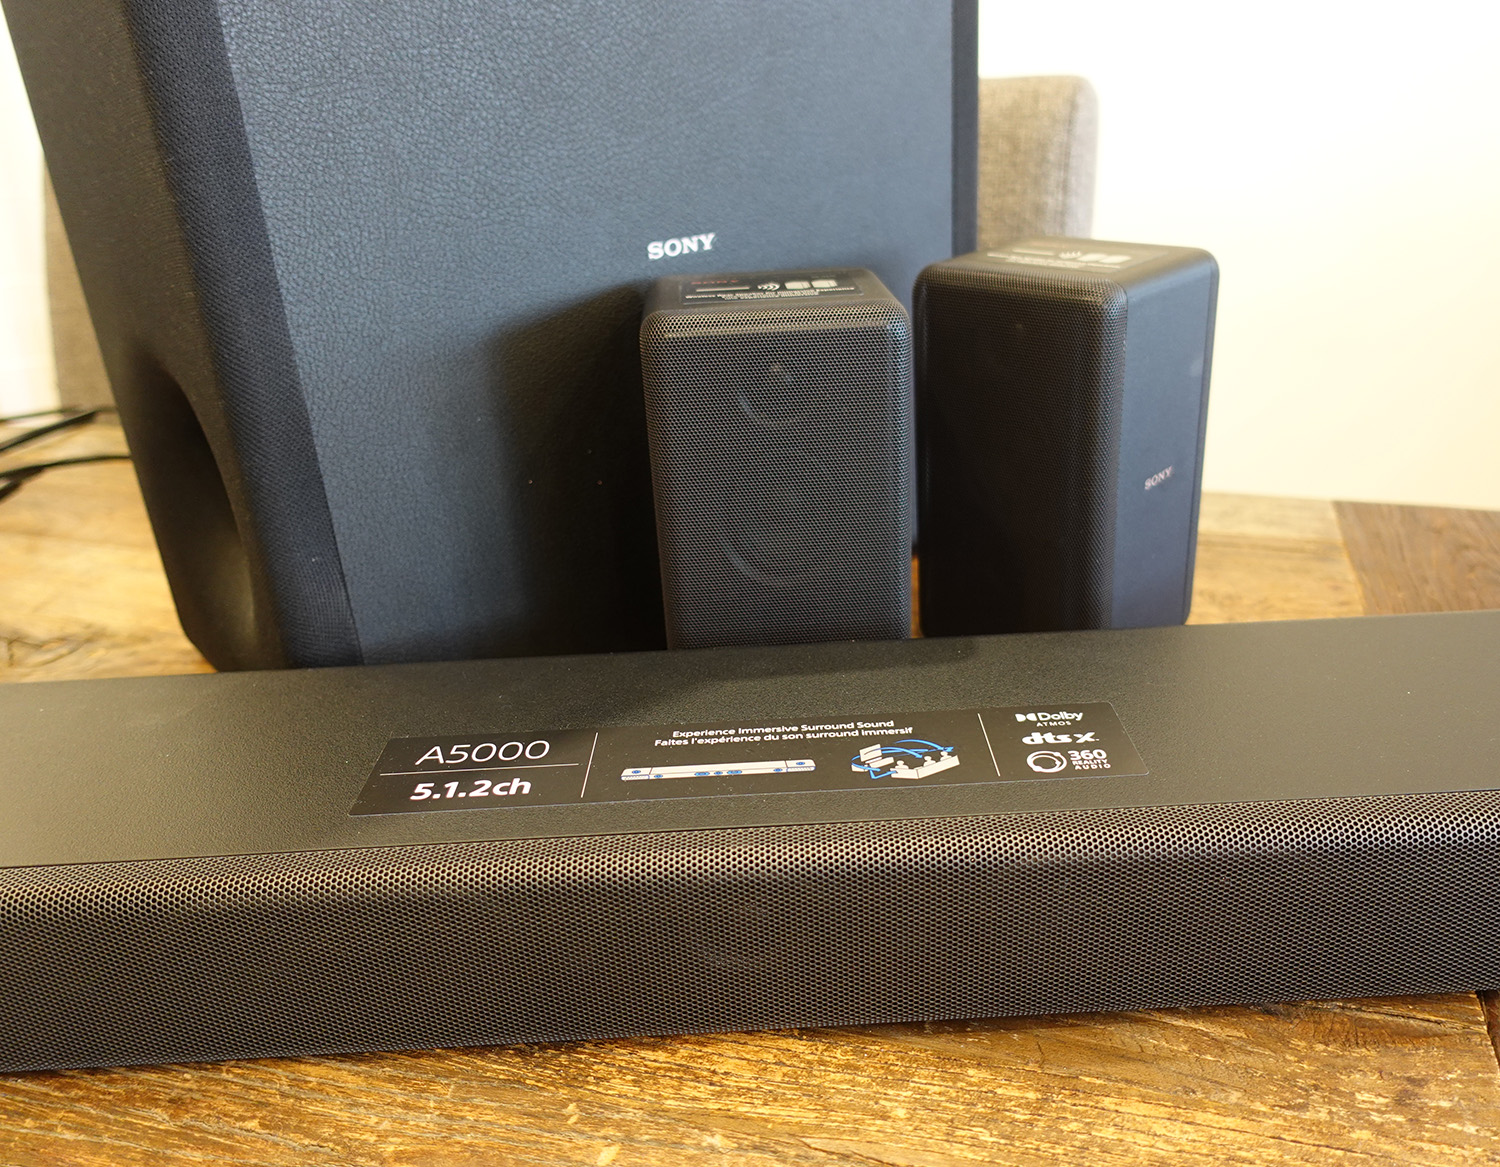 Sony HT-A5000 sound bar system review